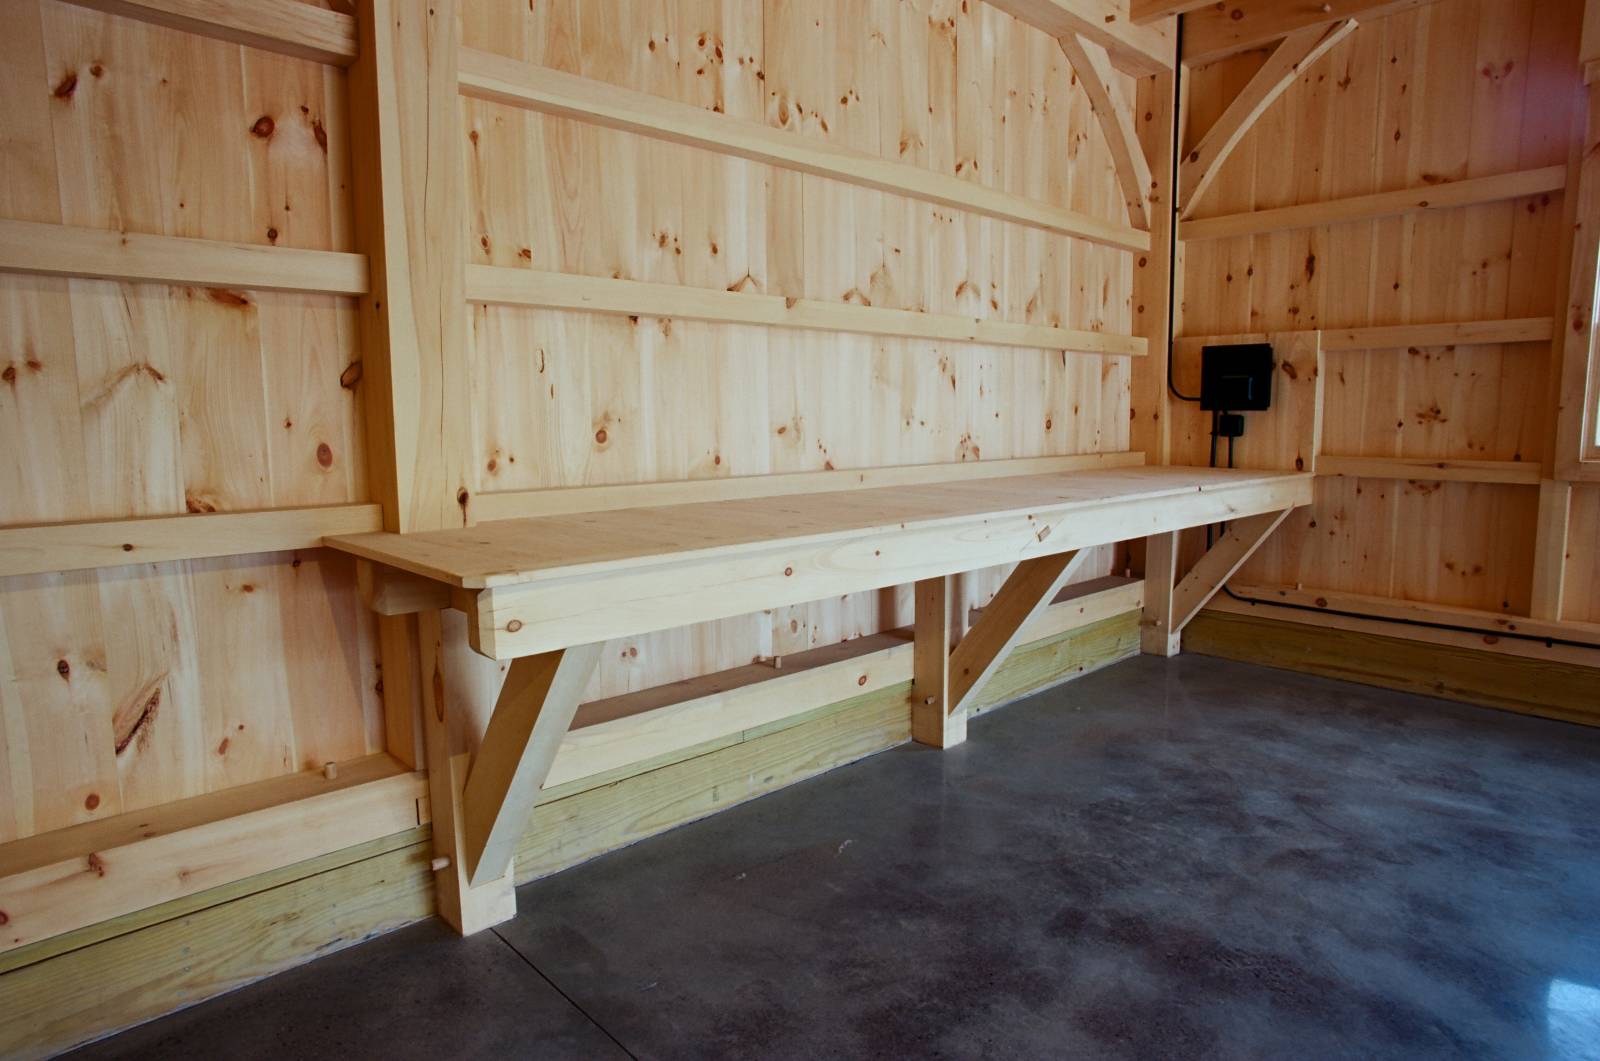 14' timber frame workbench with 1x8 pine decking